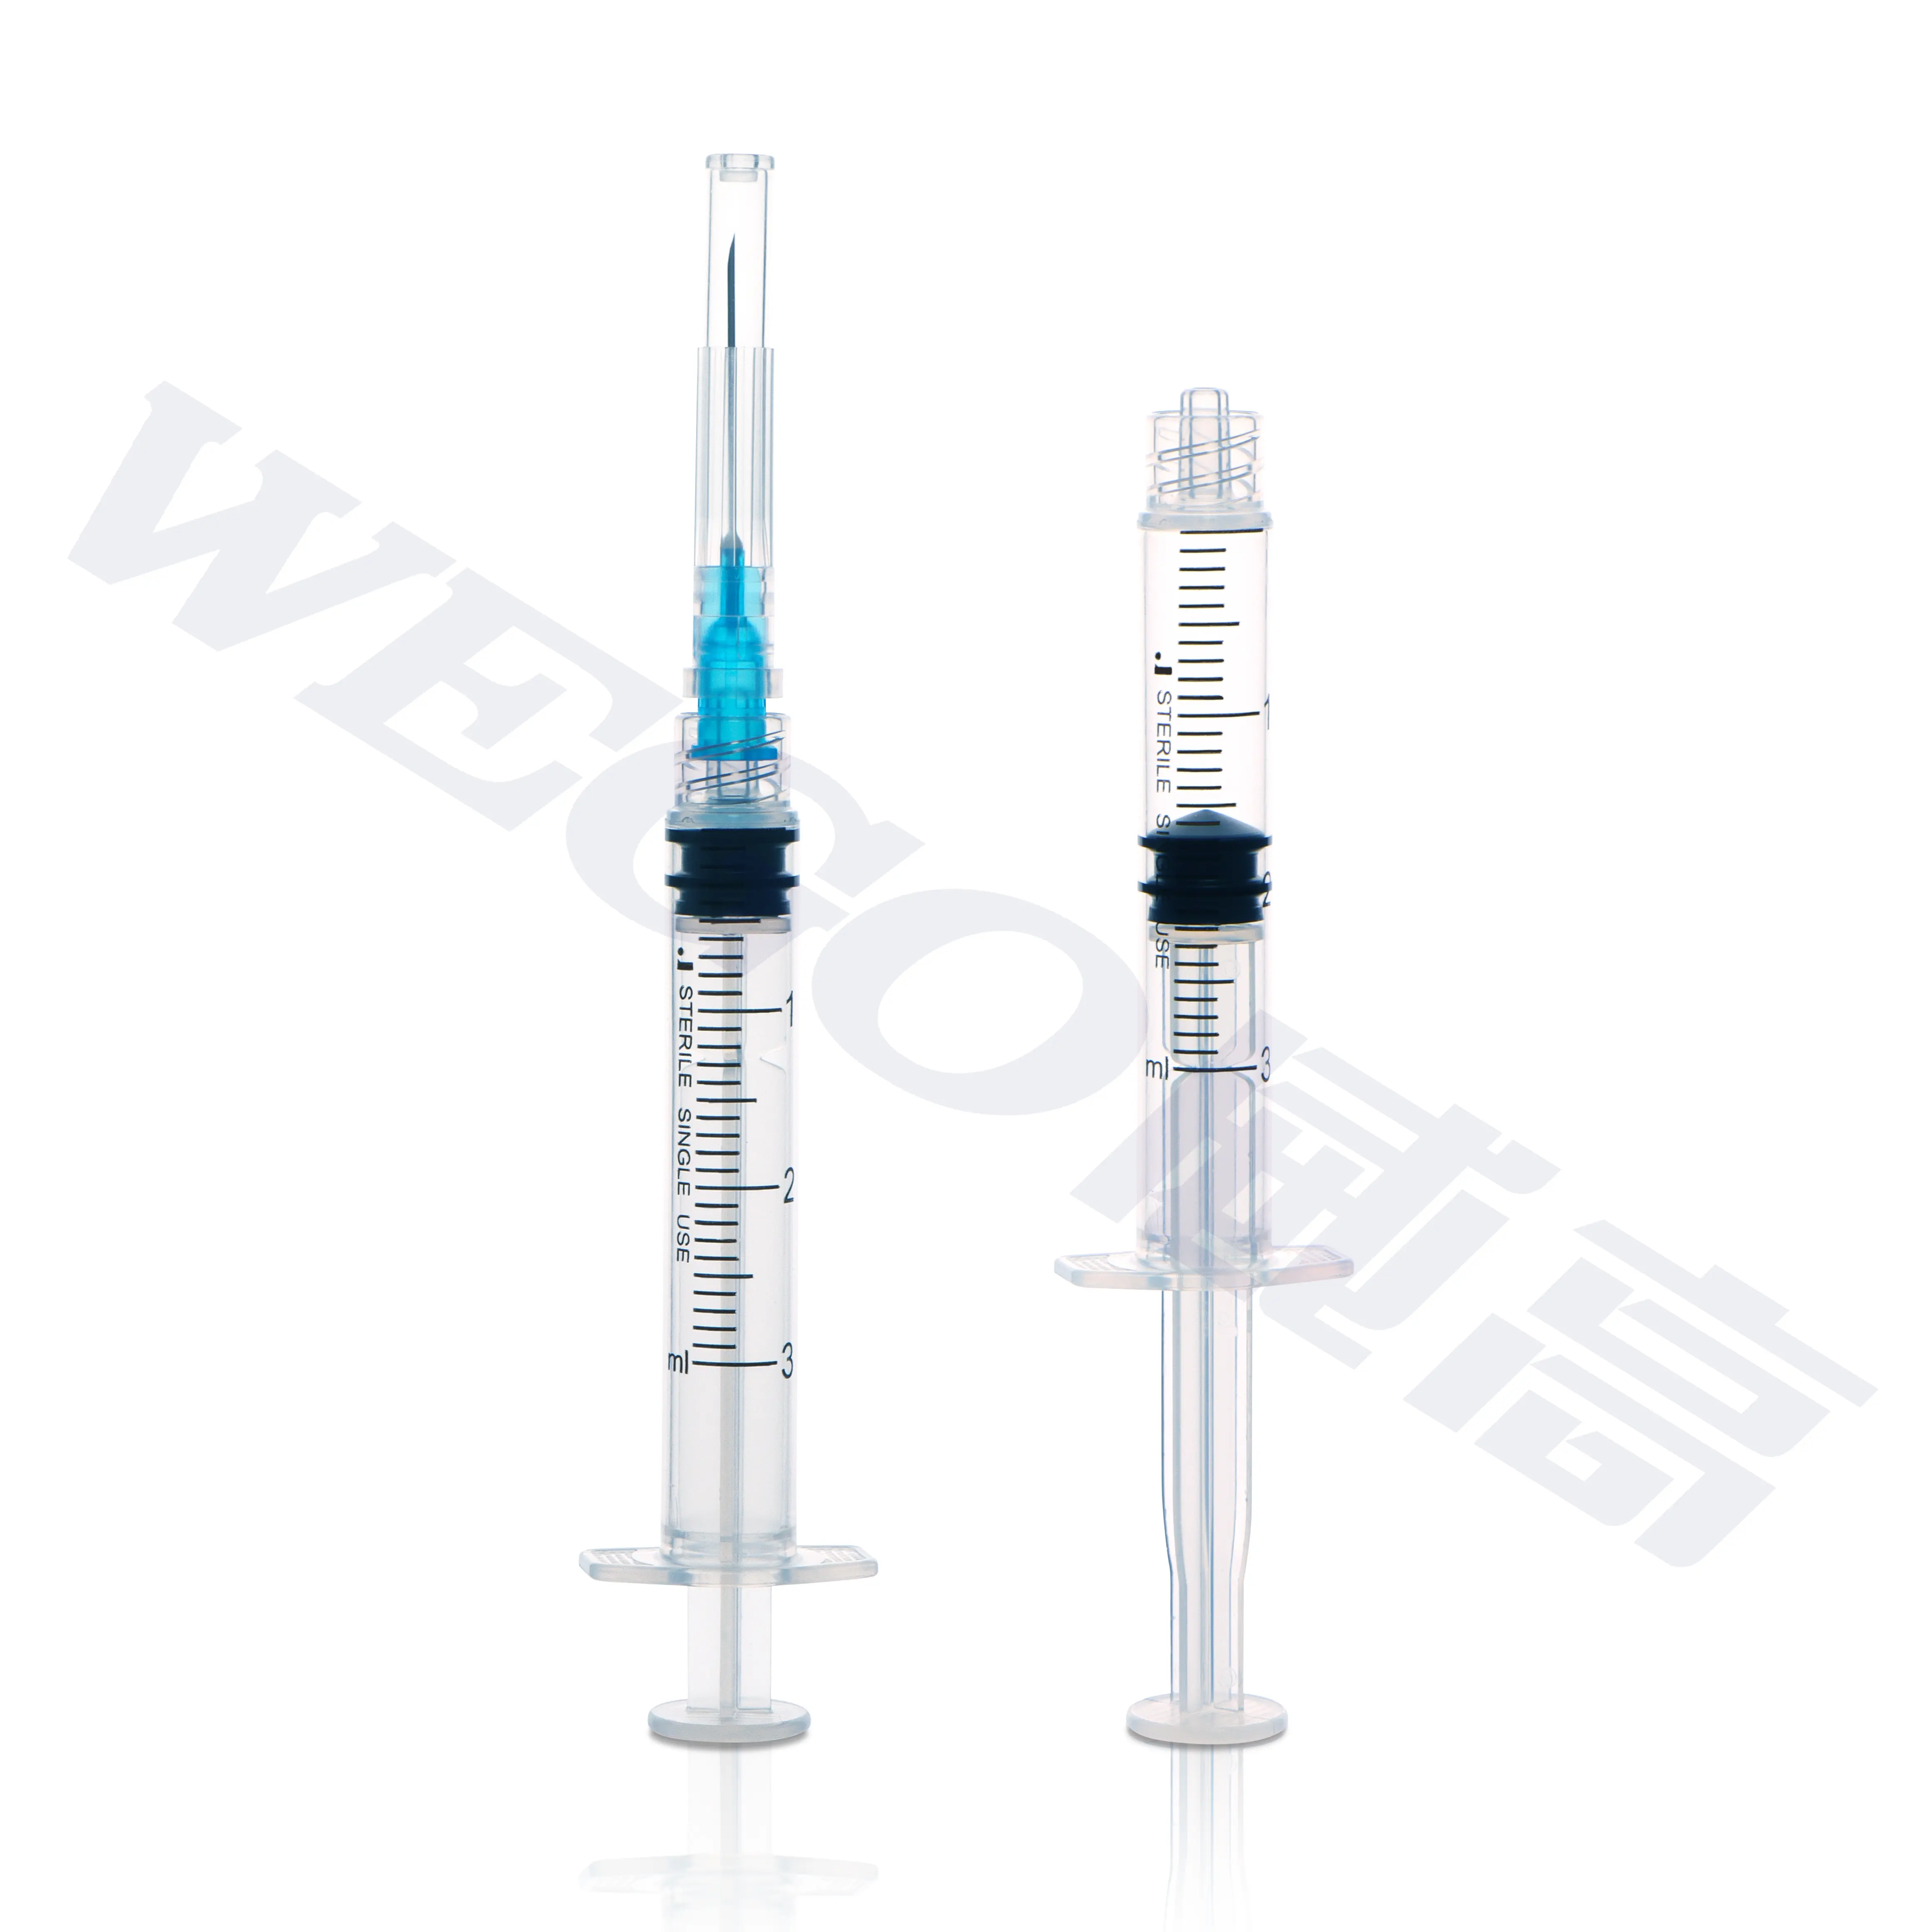 Medical Injector Syringe Oil/medical Rupper Stopper GB 15810 Luer Slip Disposable EOS Pp/ss304/medical Silicone with Needle 30ml